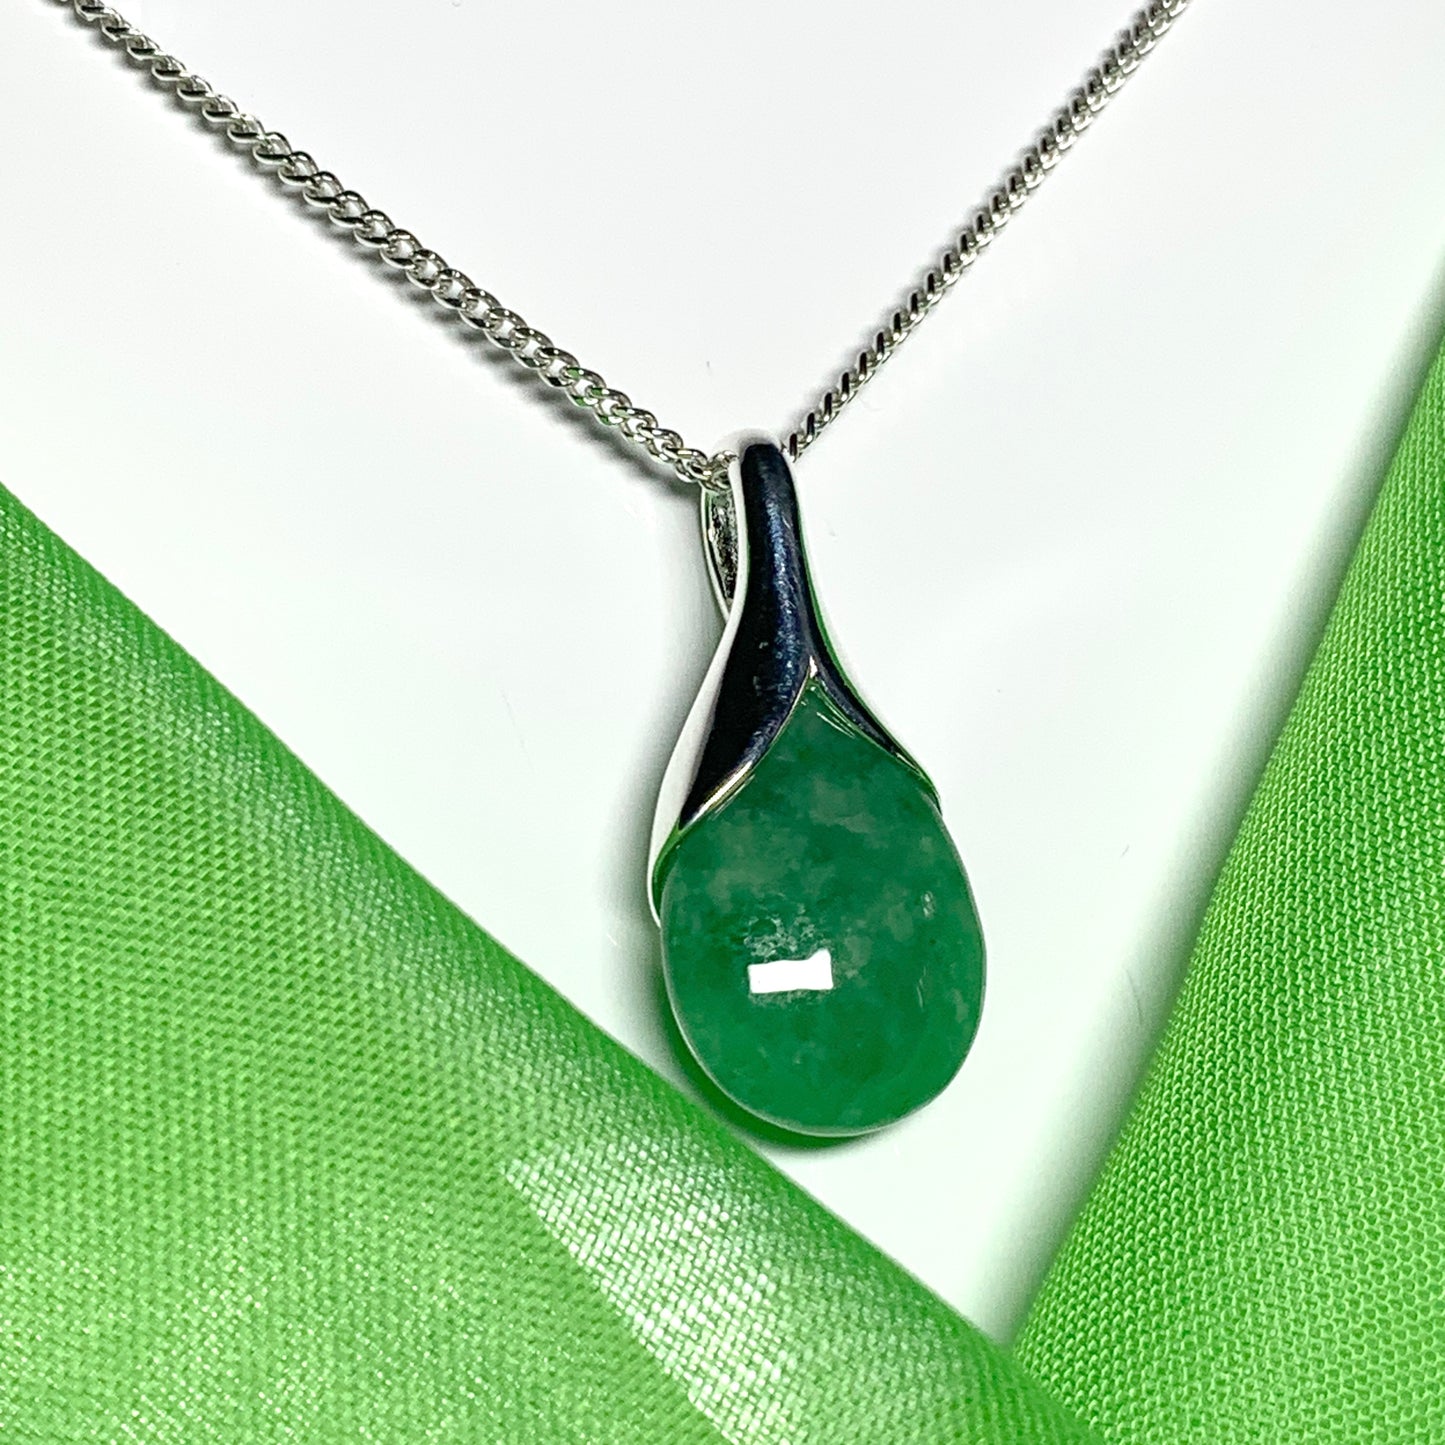 Real green jade necklace pear shaped pendant sterling silver